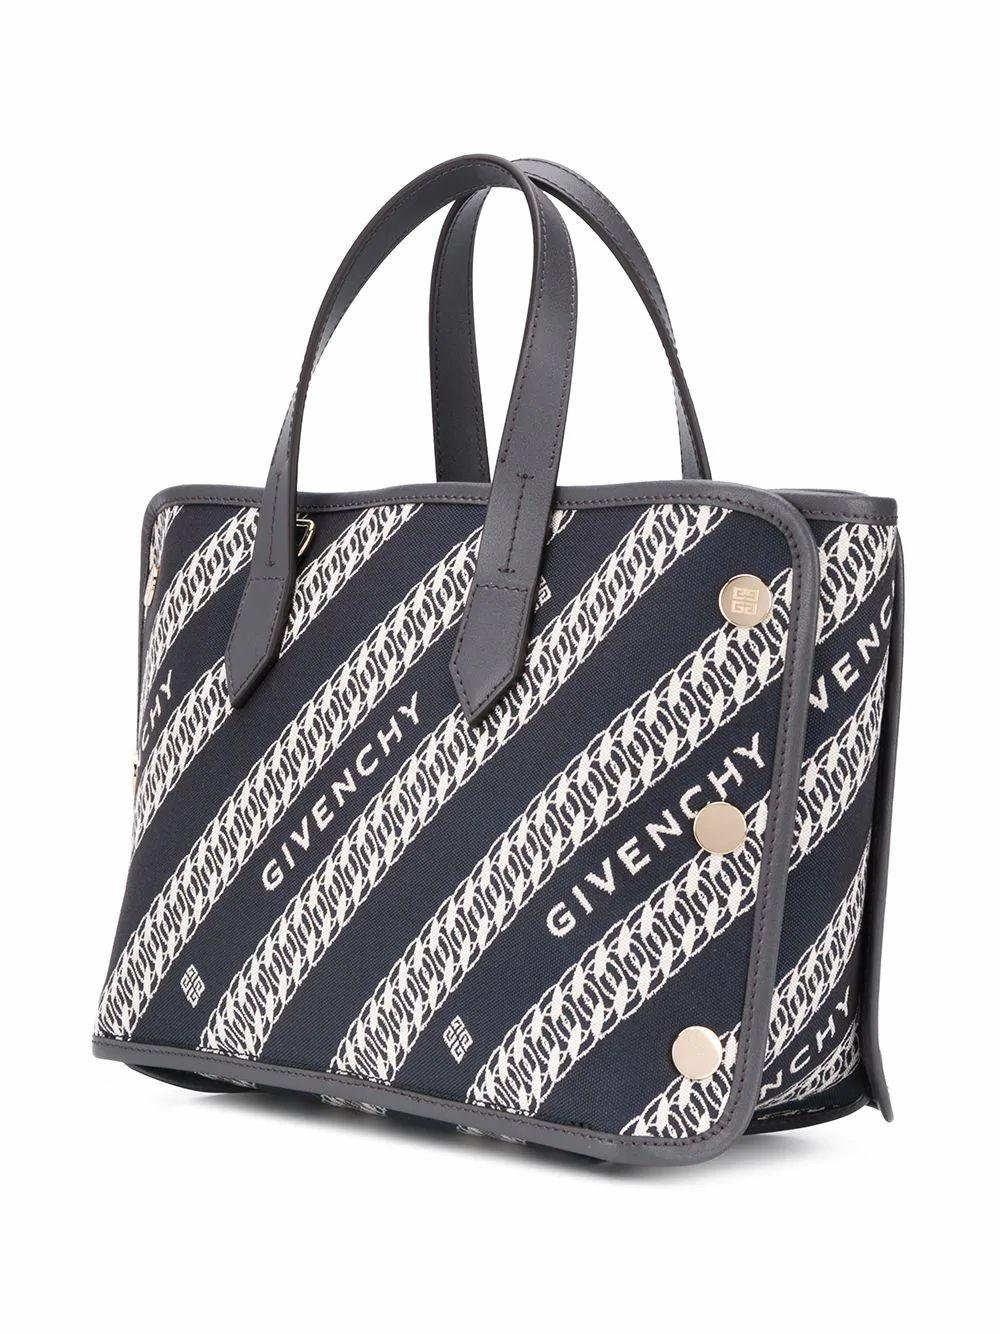 Givenchy Cotton Chain Bond Tote Bag in Blue - Save 30% - Lyst